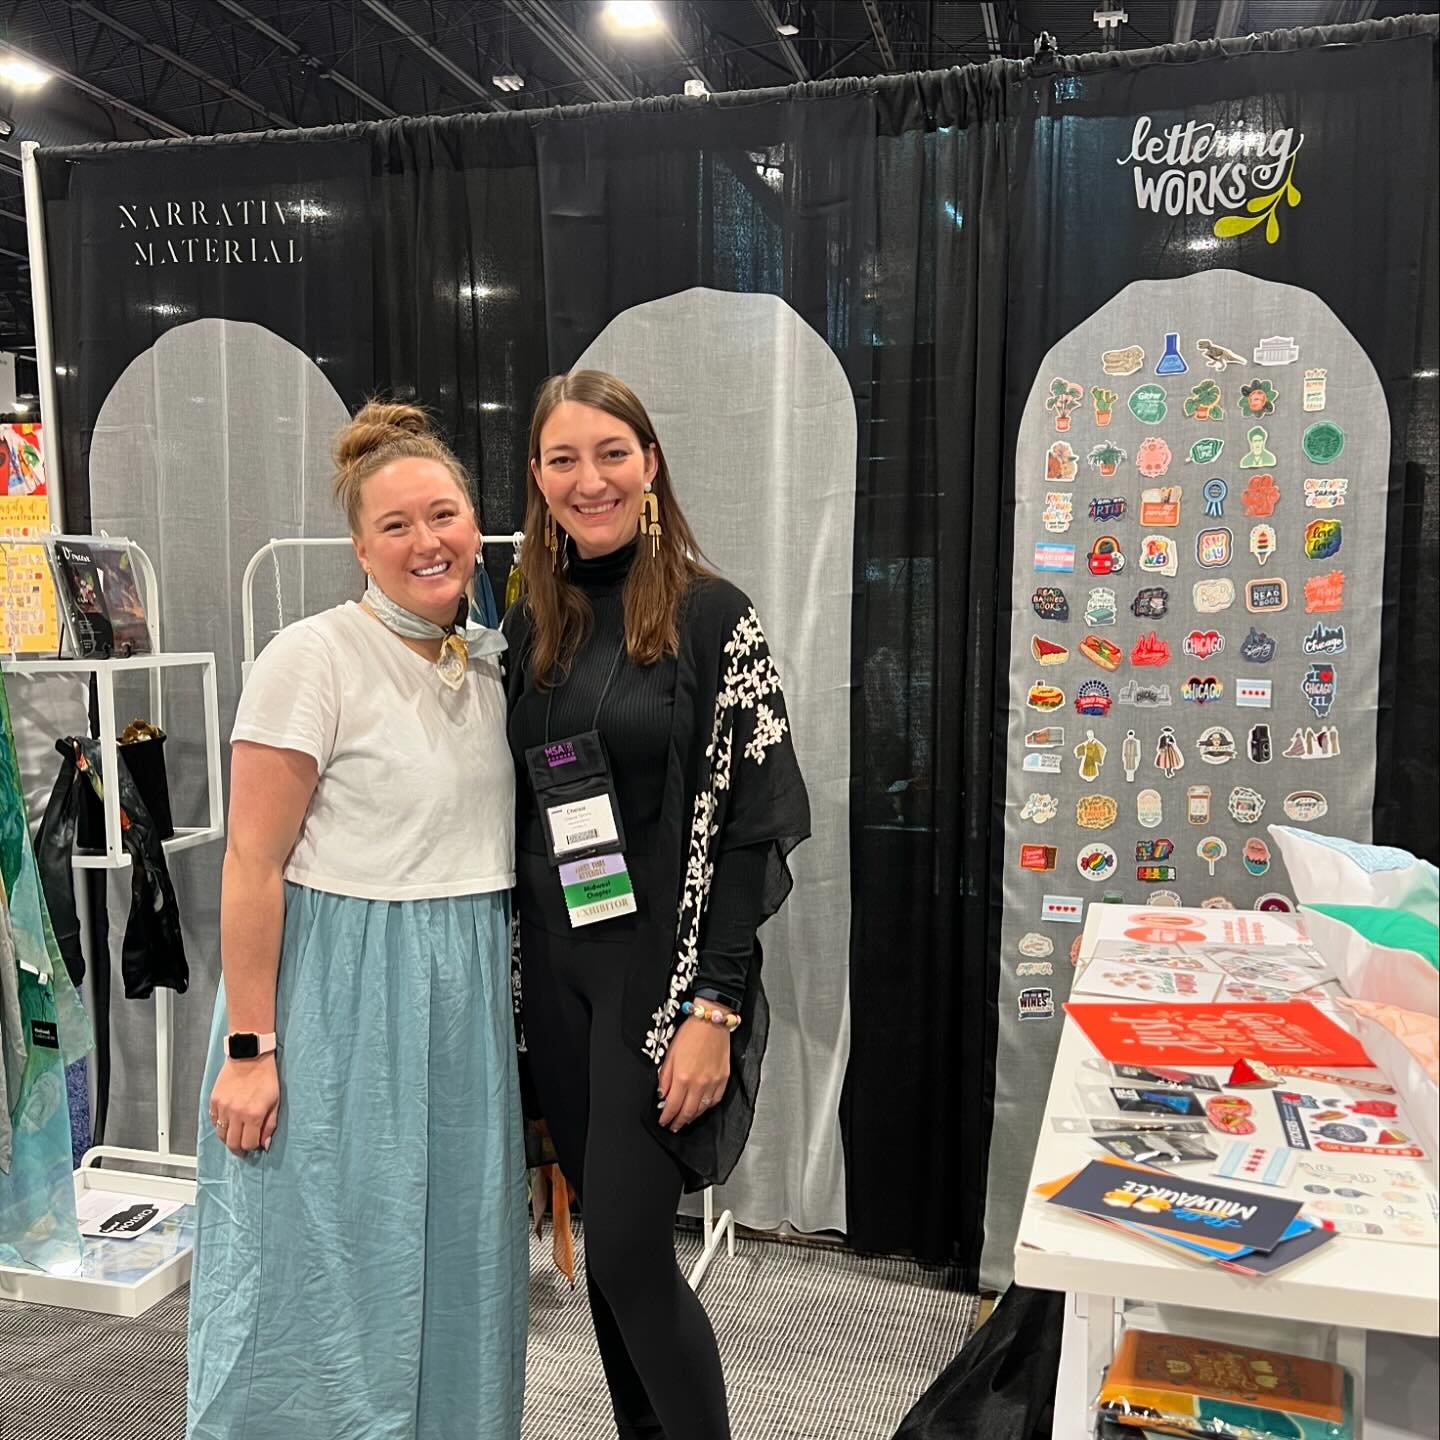 Throwback to my very first trade show: MSA Forward in Denver last May!

Katy of Narrative Material has been such a helpful partner and small business friend as I&rsquo;ve established myself and Lettering Works in the museum space 💖

MSA Forward is h